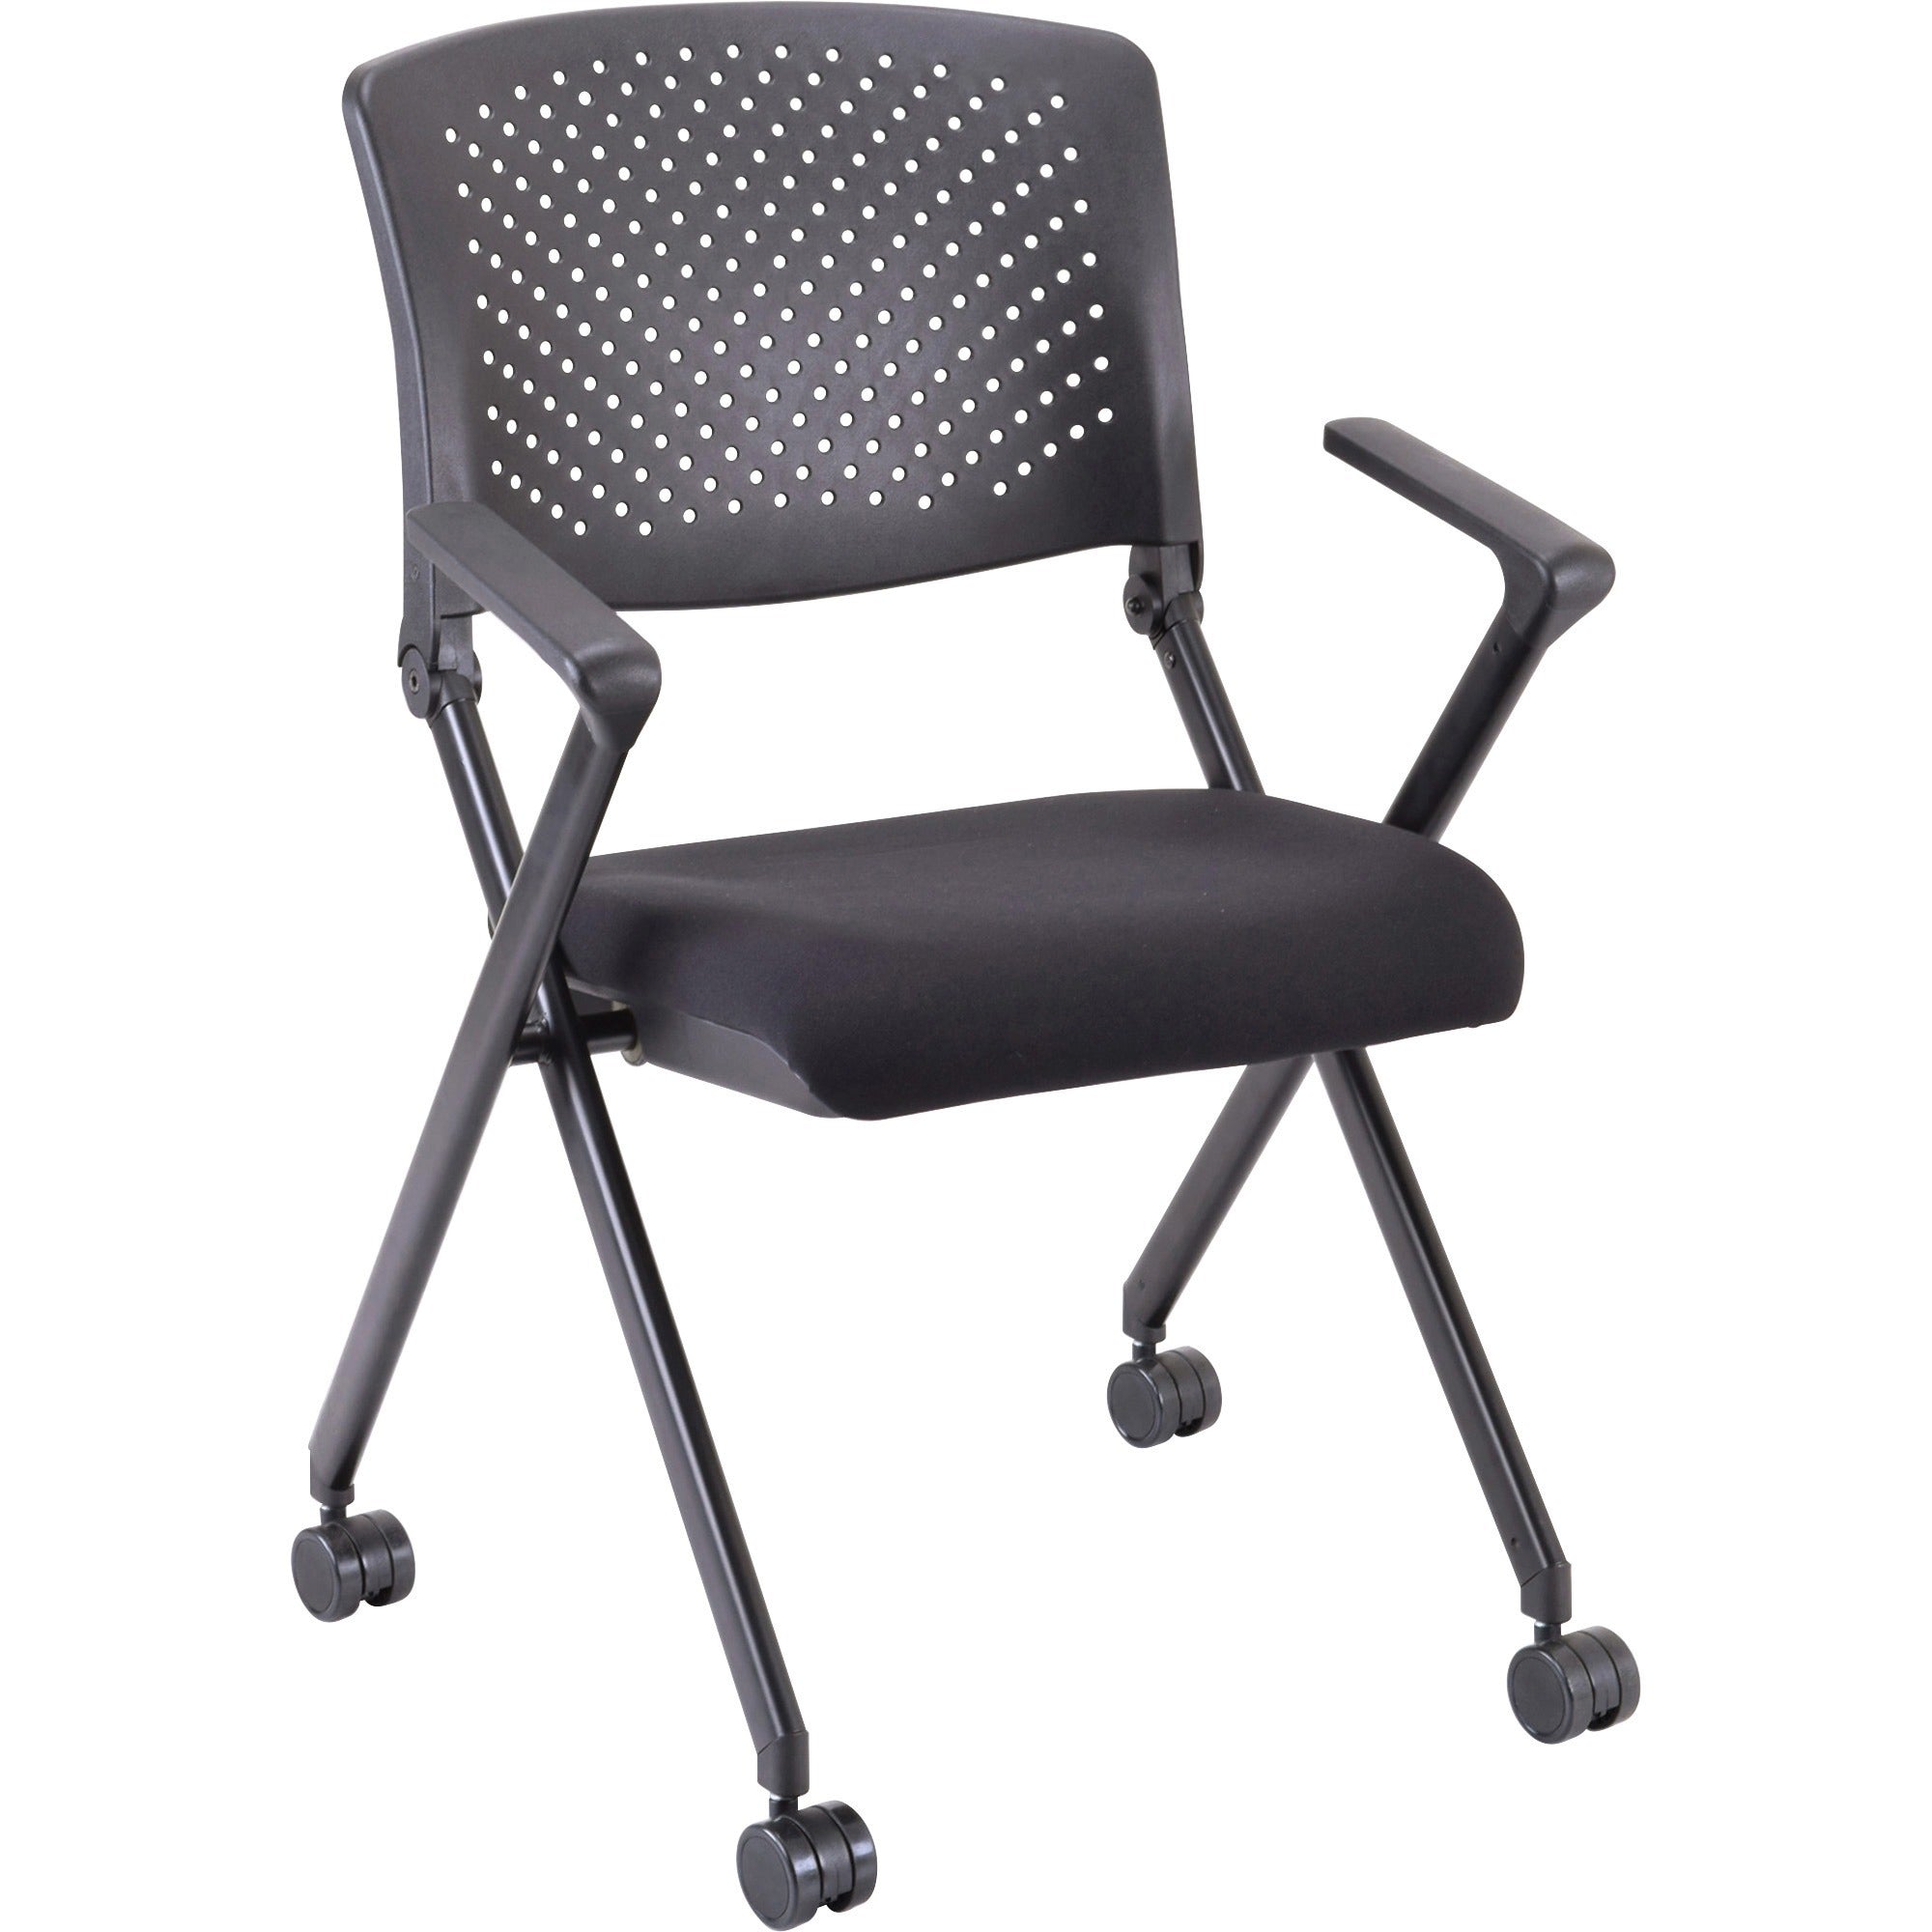 lorell-upholstered-foldable-nesting-chairs-with-arms-black-fabric-seat-black-plastic-back-metal-frame-2-carton_llr41847 - 1